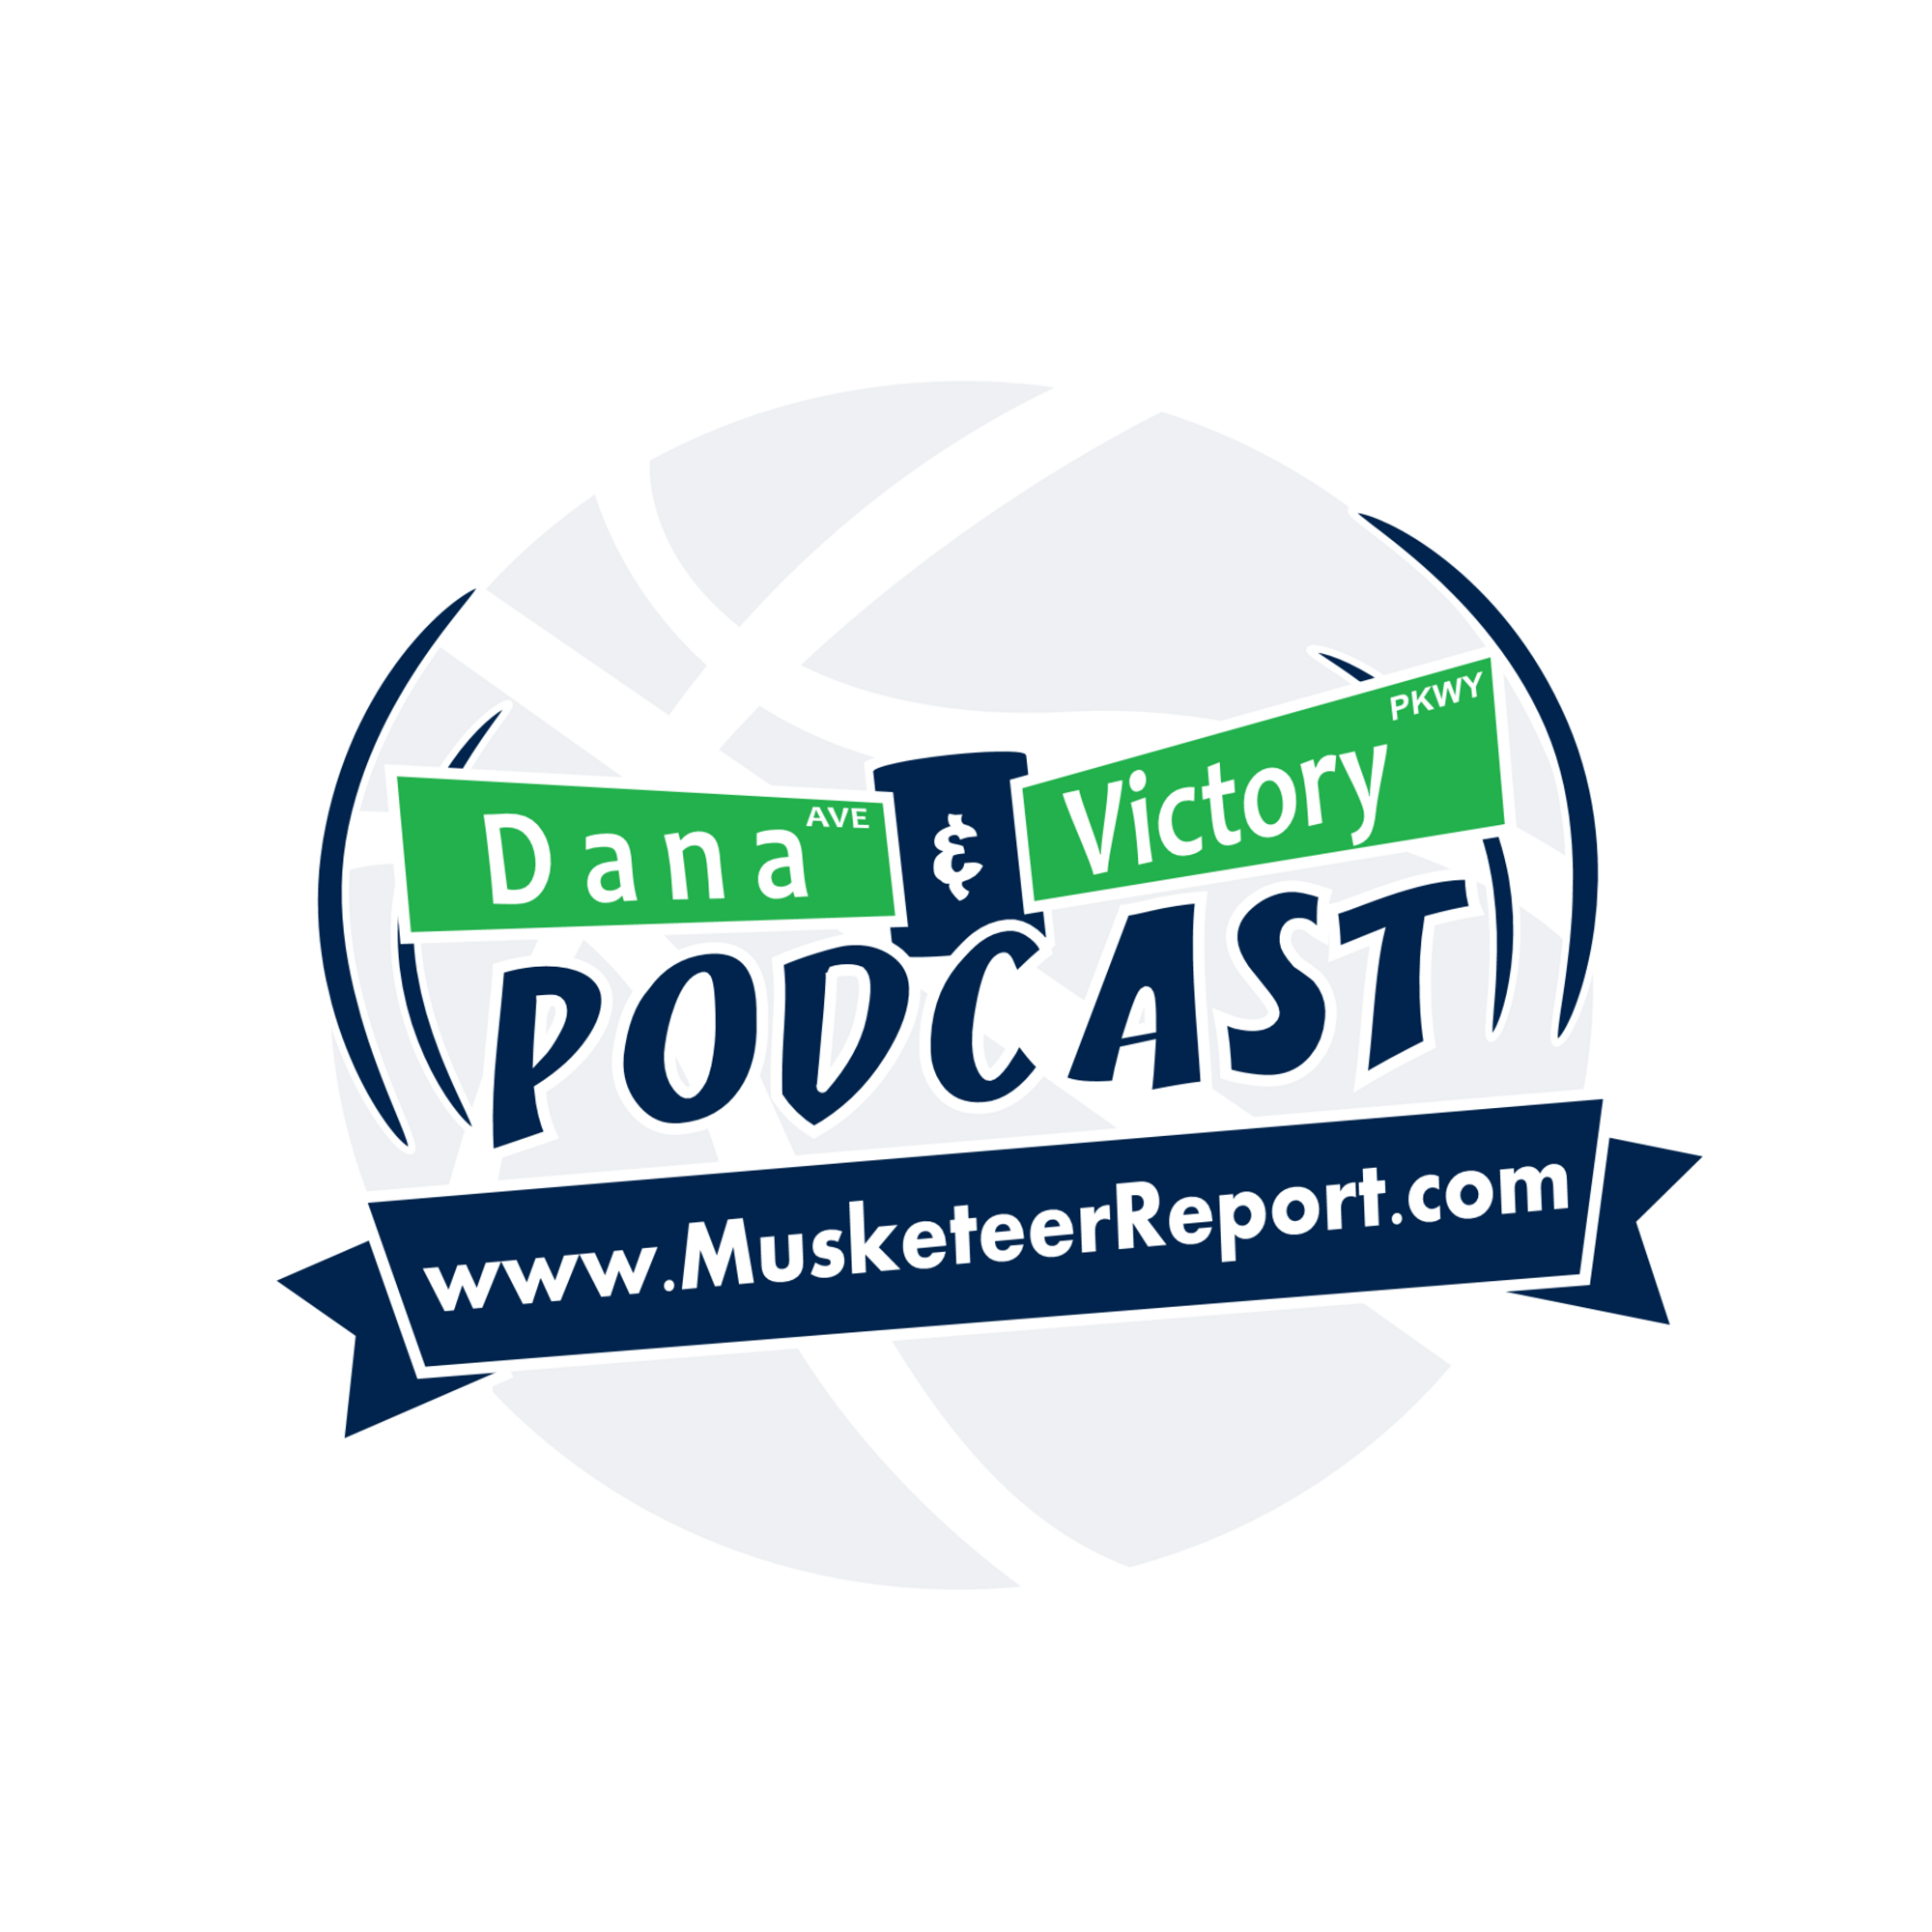 Dana & Victory Podcast: Episode 107 (XU off to 3-0 start in Big East)